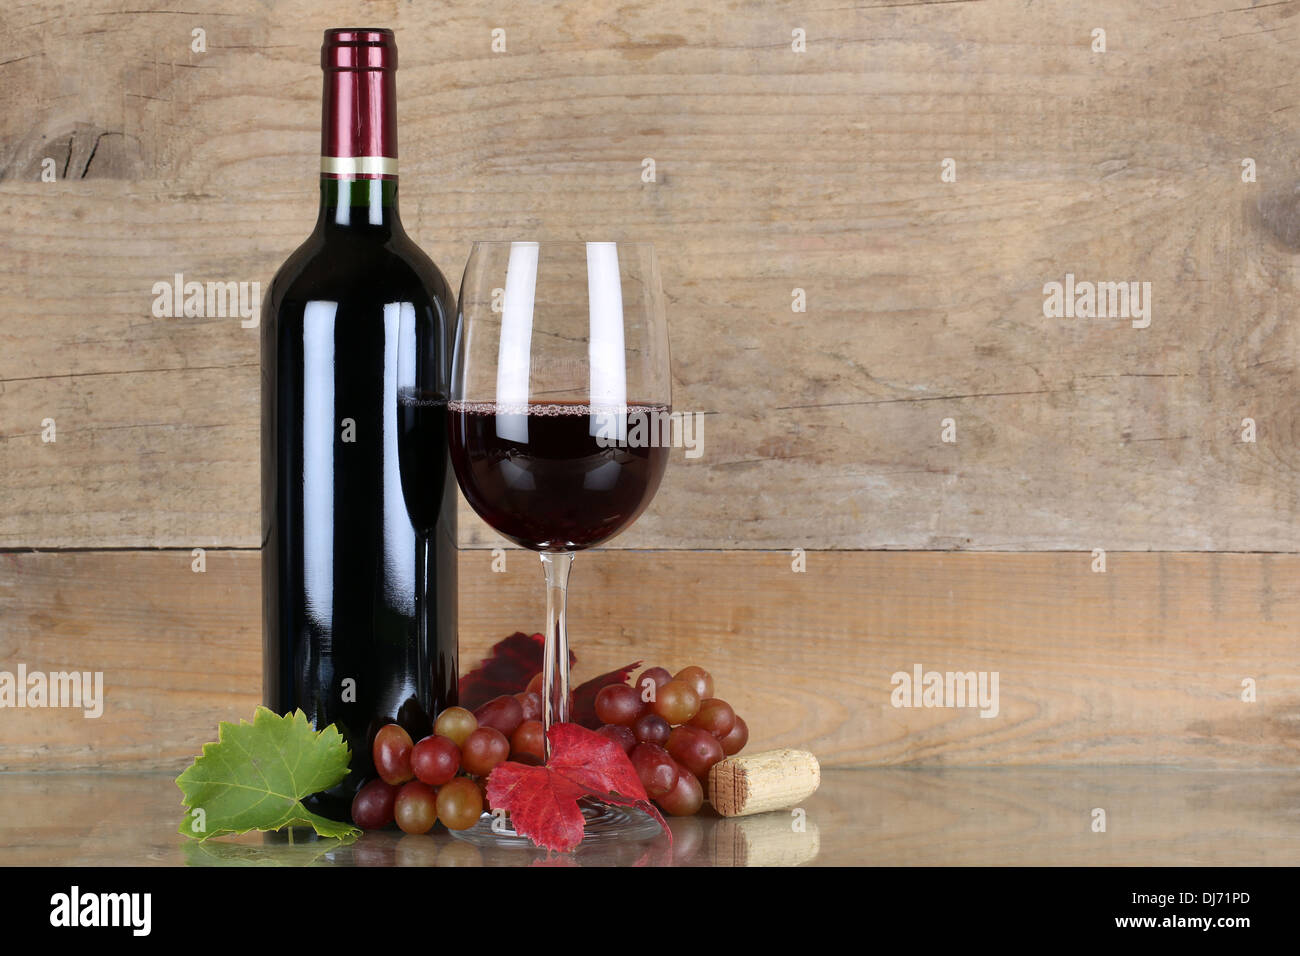 Red wine in wine bottle and glass in front of a wooden background Stock Photo